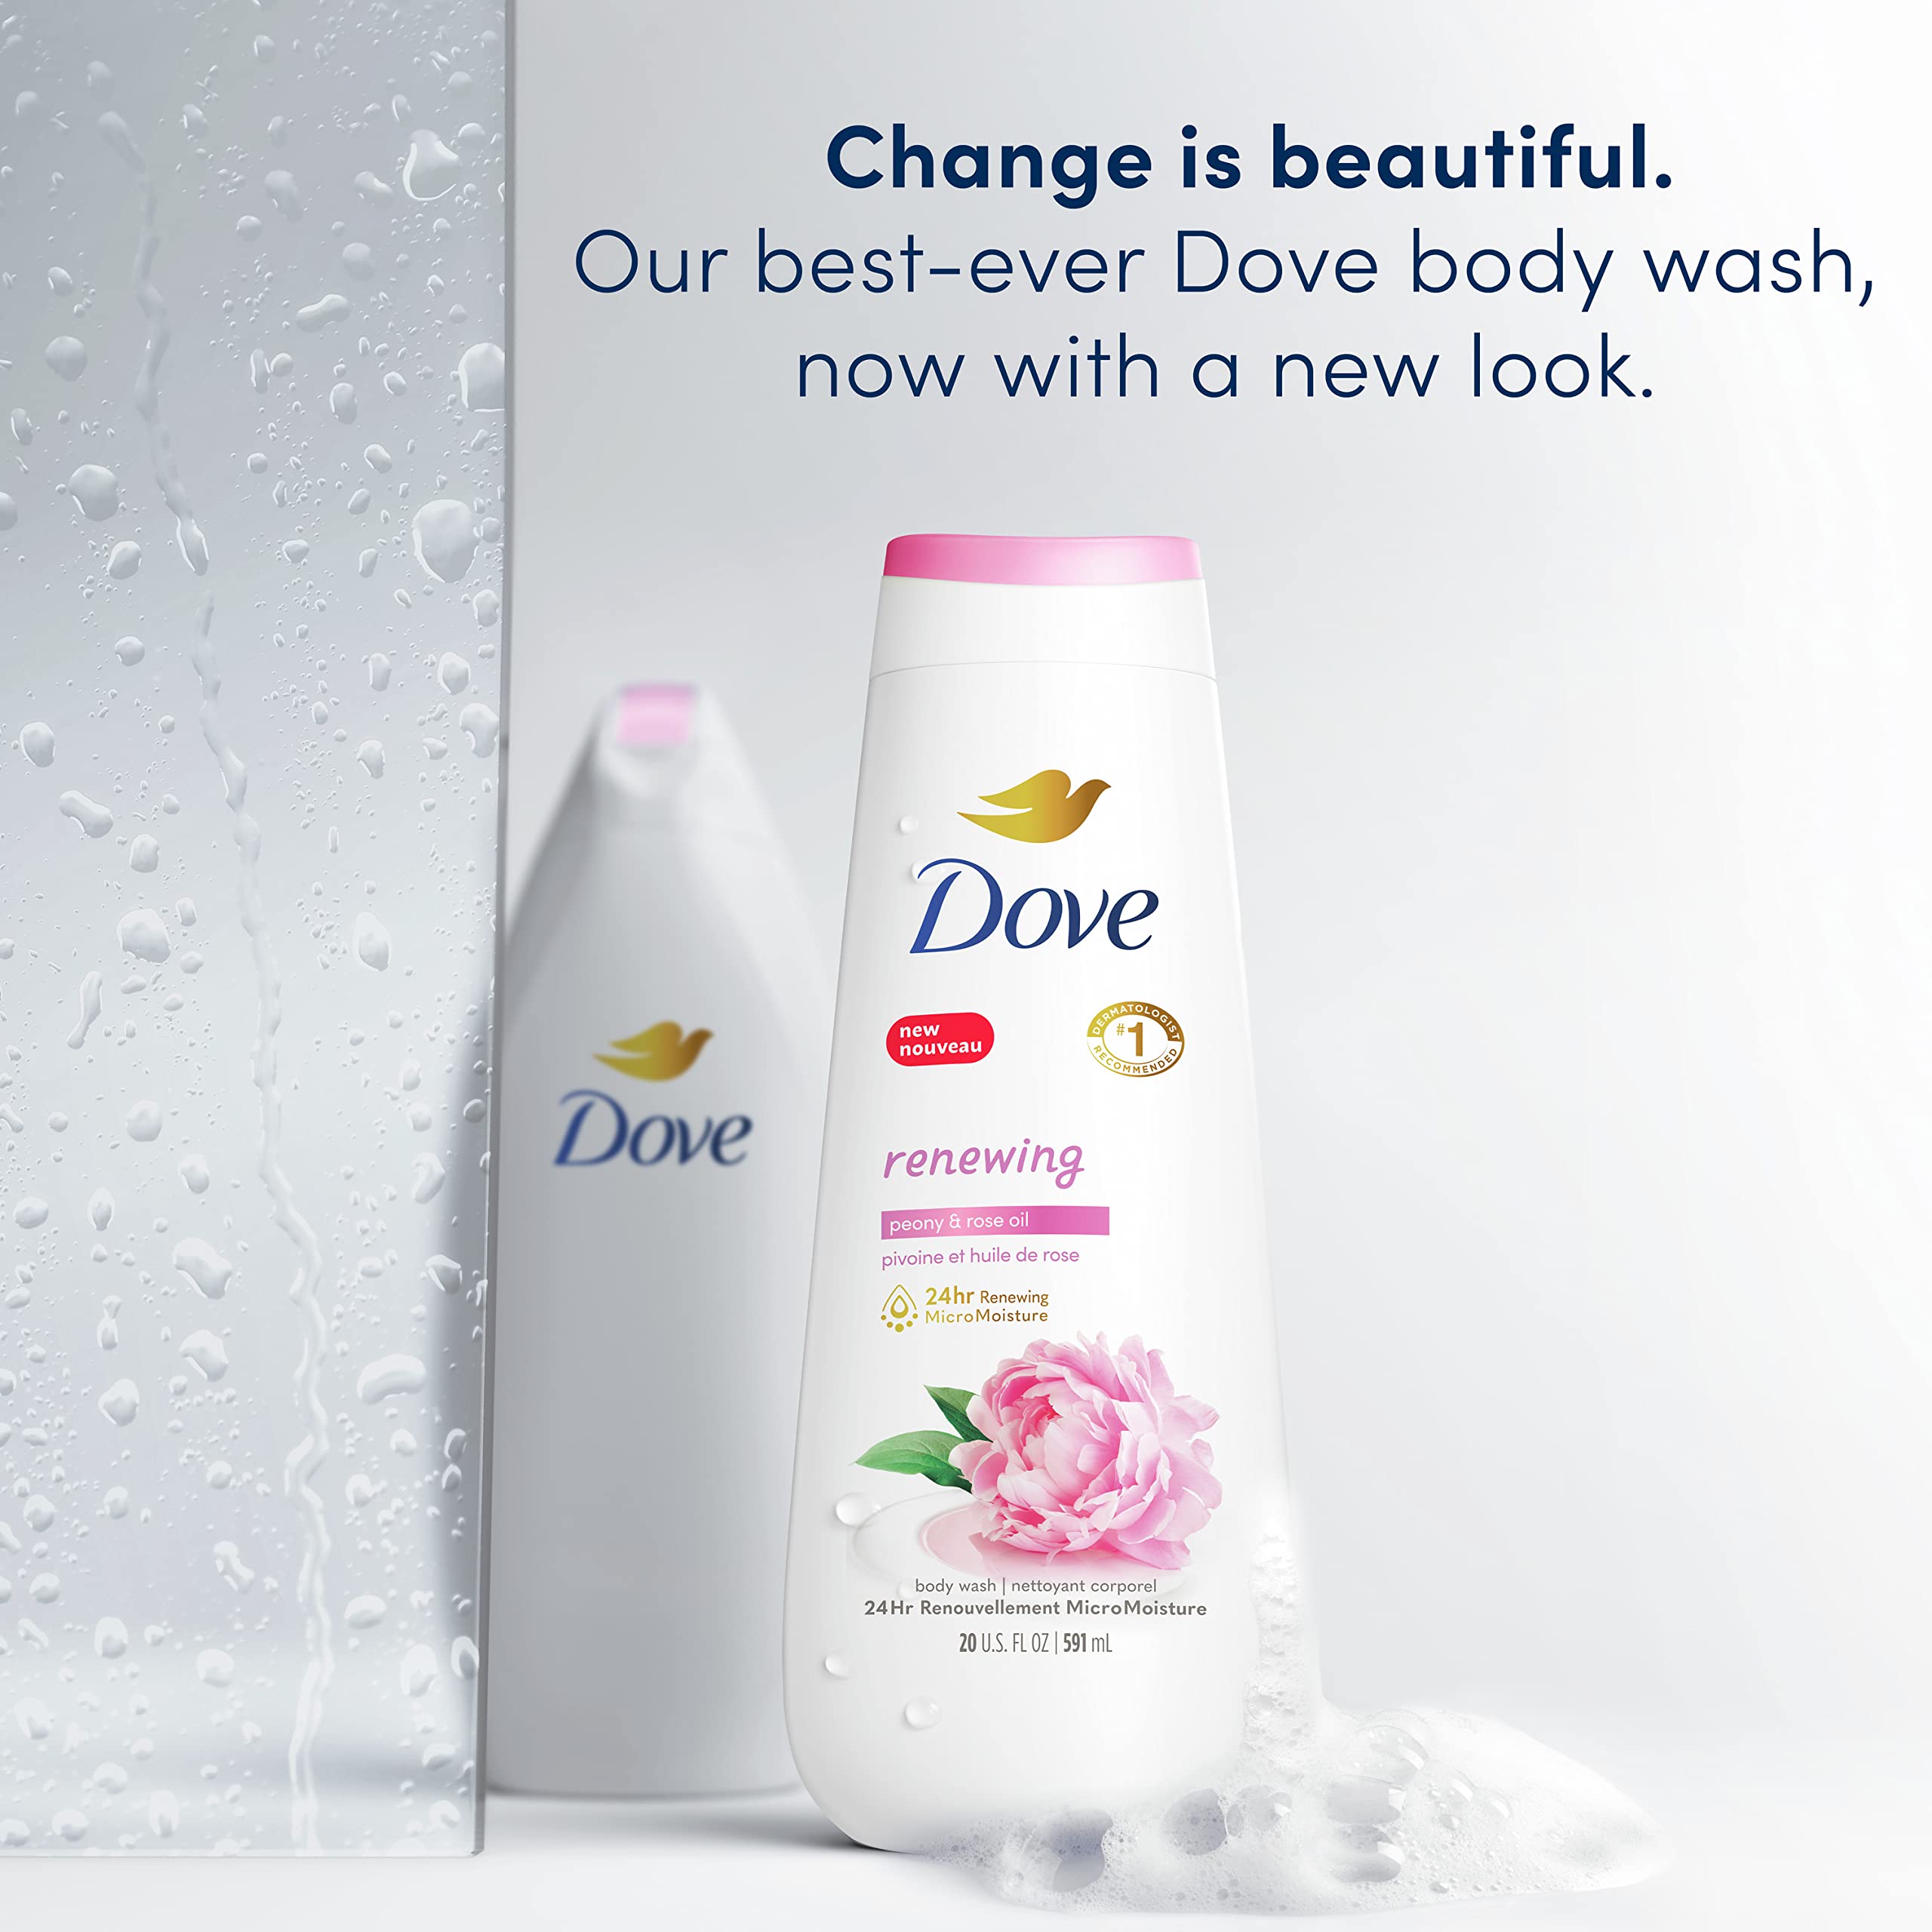 Dove Body Wash Renewing Peony and Rose Oil 4 Count for Renewed, Healthy-Looking Skin Gentle Skin Cleanser with 24hr Renewing MicroMoisture 20 oz